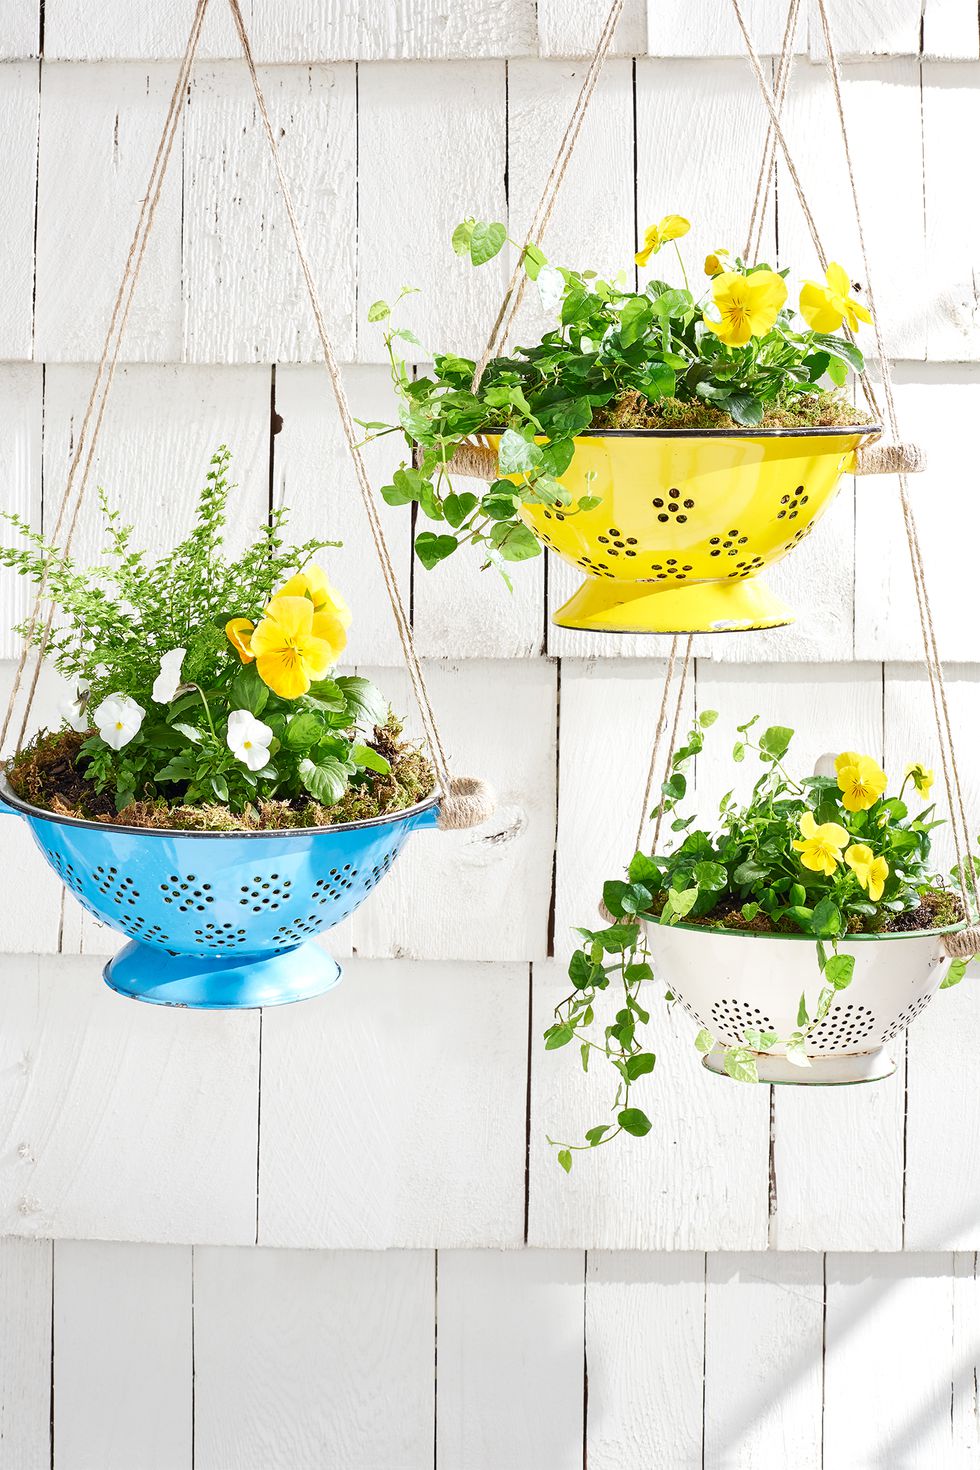 Whimsical DIY Upcycled Gardens with Farmhouse Style - The Cottage Market